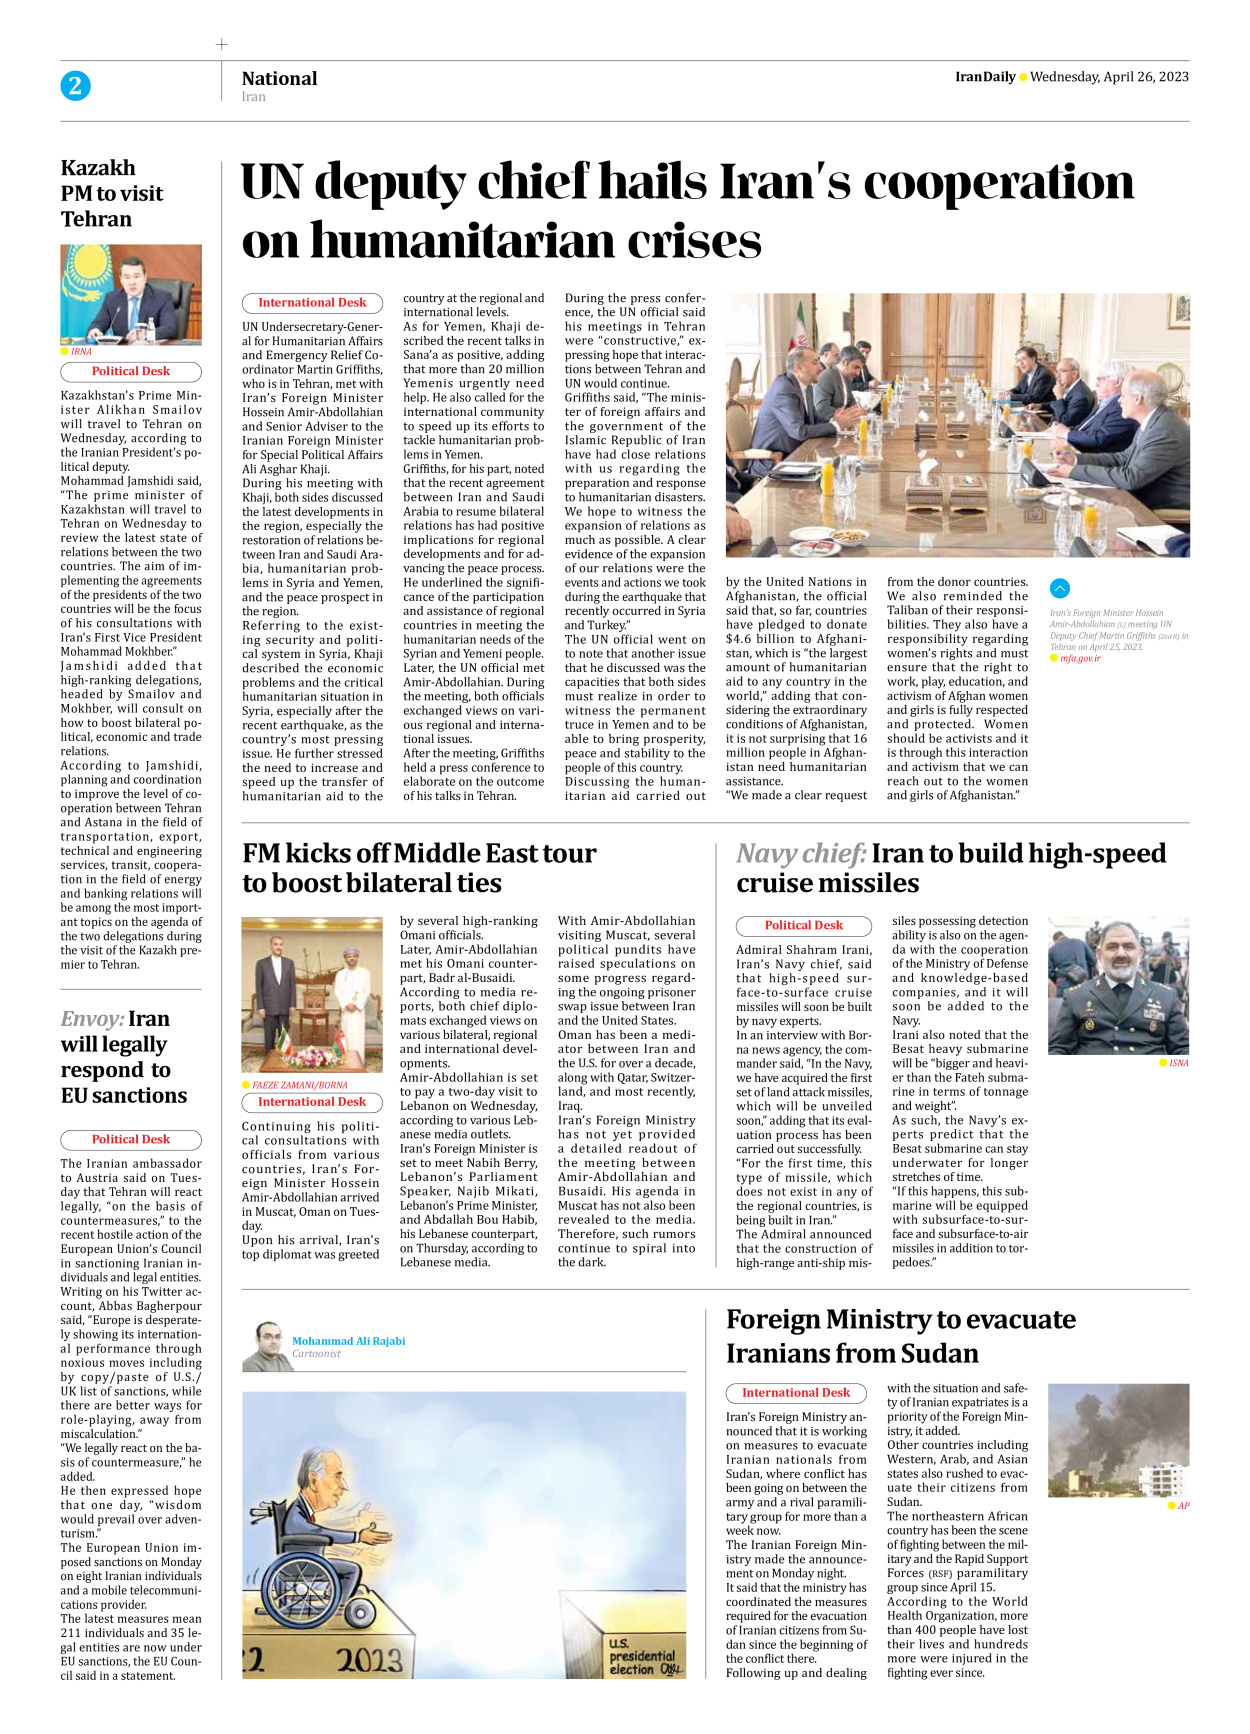 Iran Daily - Number Seven Thousand Two Hundred and Seventy Six - 26 April 2023 - Page 2